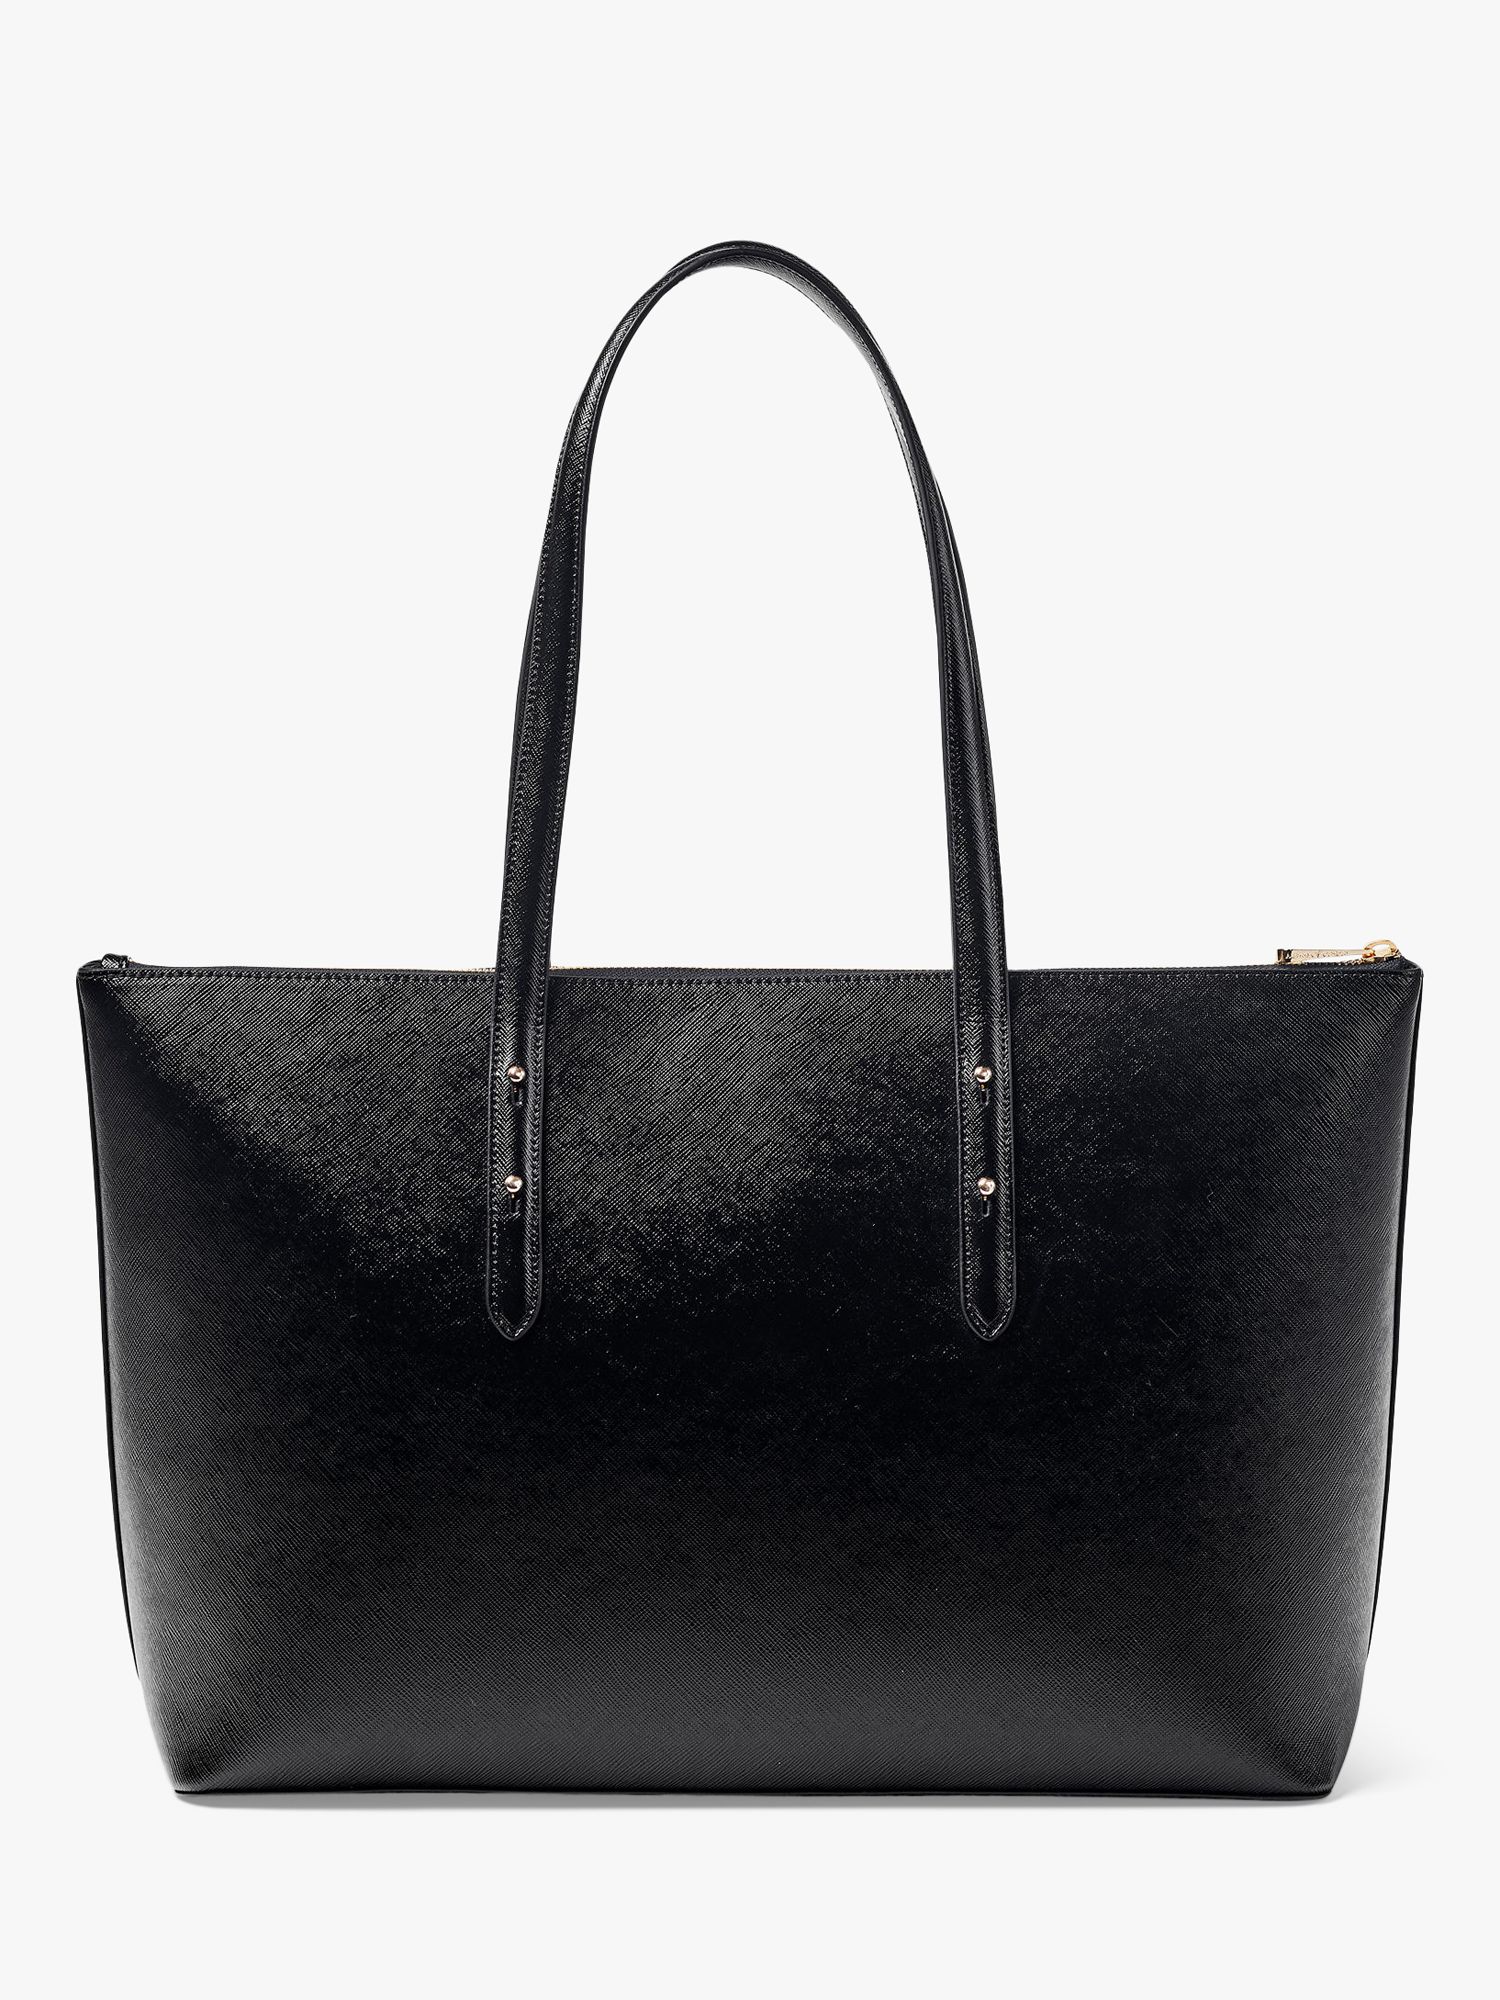 Aspinal of London Regent Saffiano Leather Zip-Top Tote Bag, Black at ...